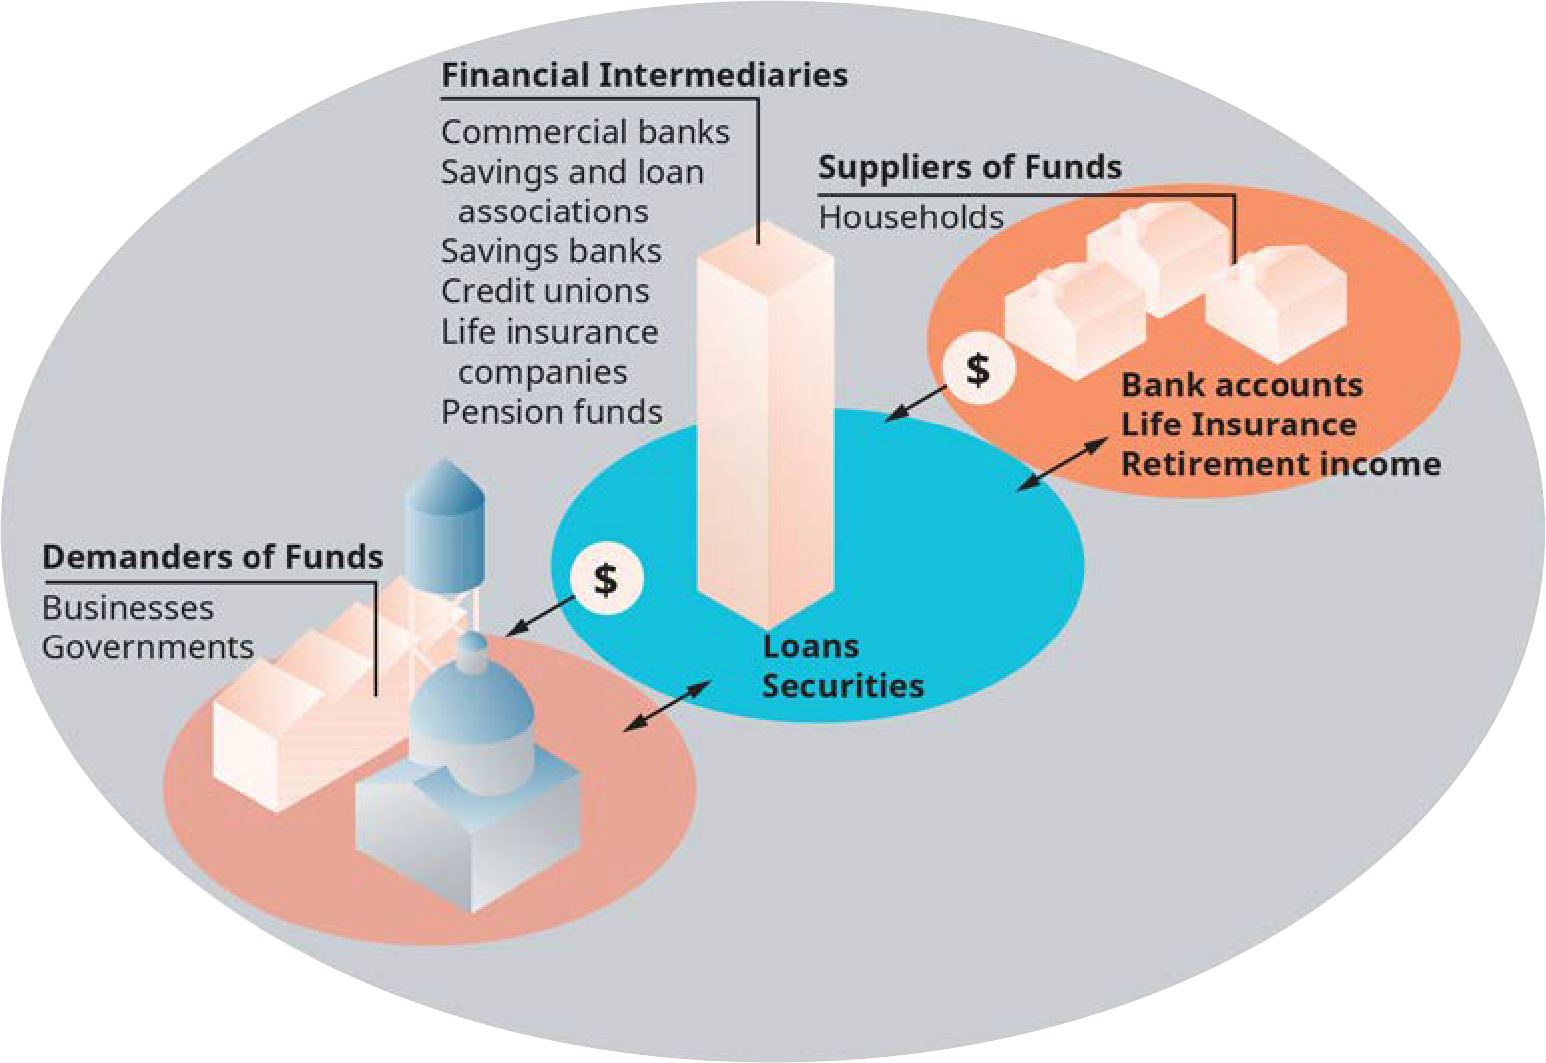 Exhibit 7.1 The Financial Intermediation Process* Only the dominant suppliers and demanders are shown here. Clearly, a single household, business, or government can be either a supplier or demander, depending on circumstances. (Attribution: Copyright Rice University, OpenStax, under CC BY 4.0 license.)